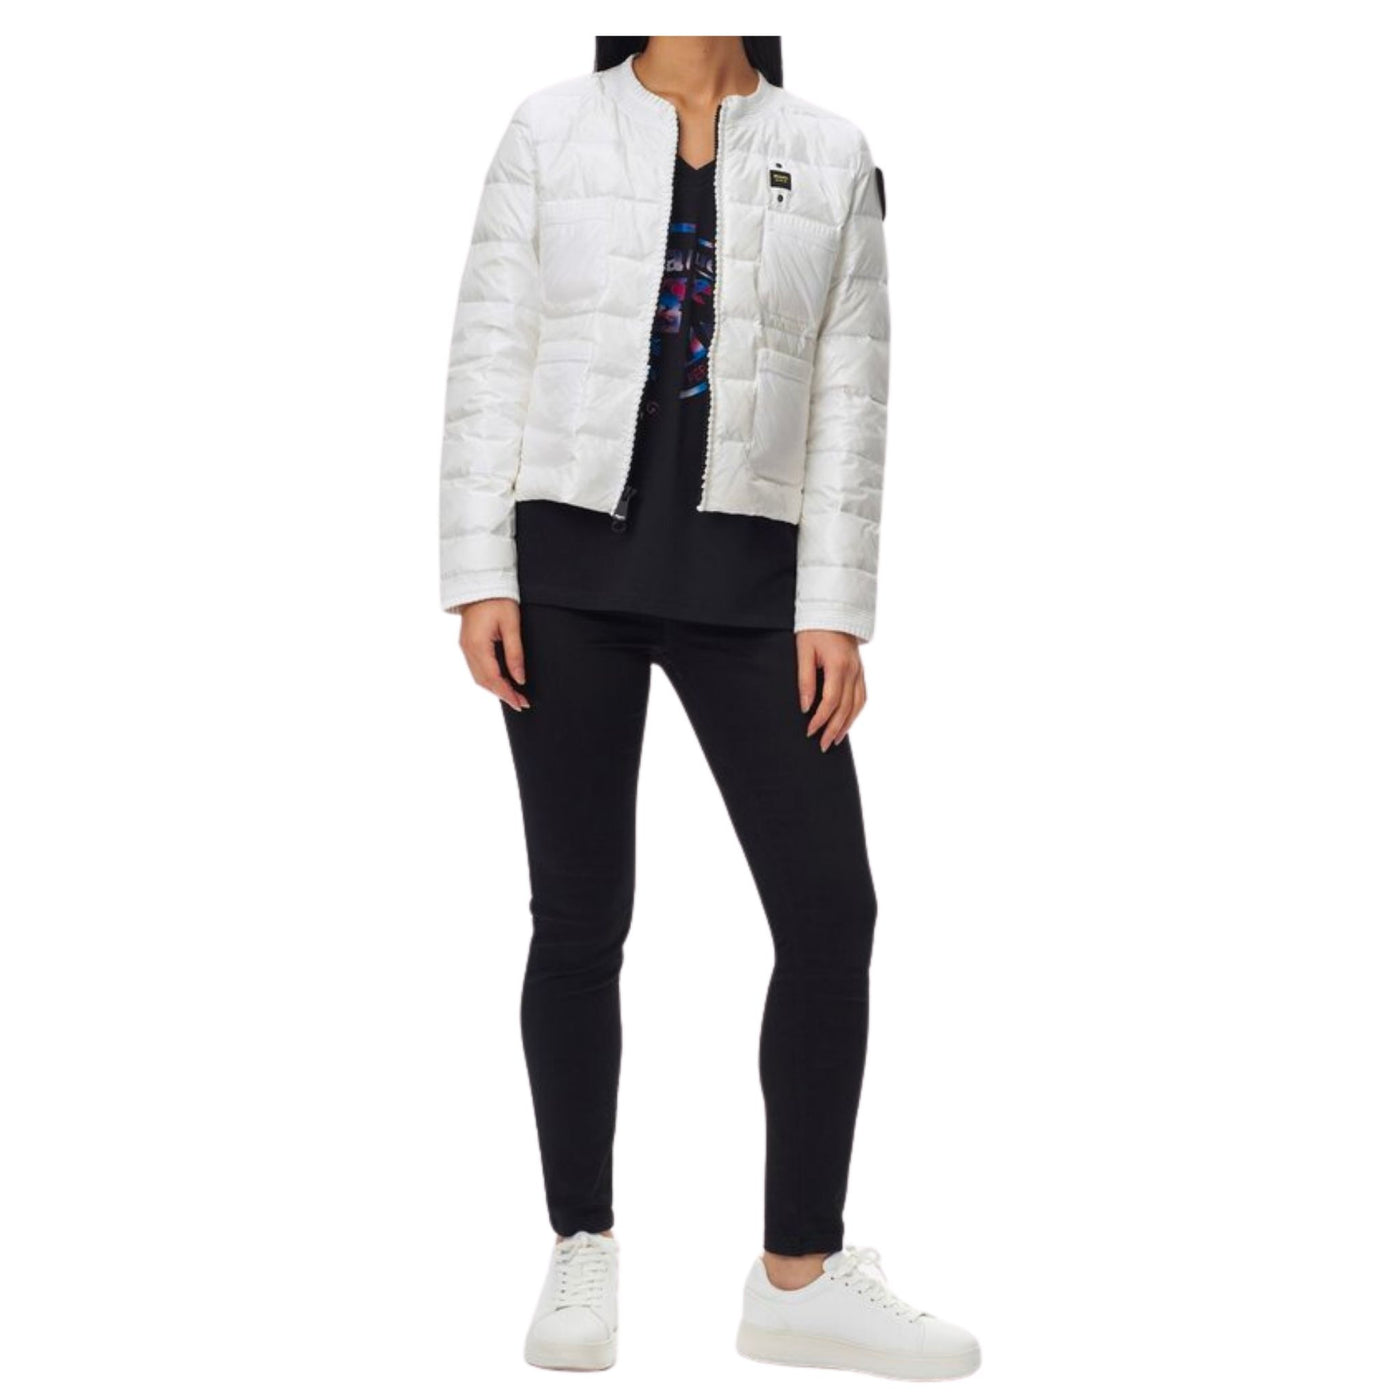 Women's down quilted jacket